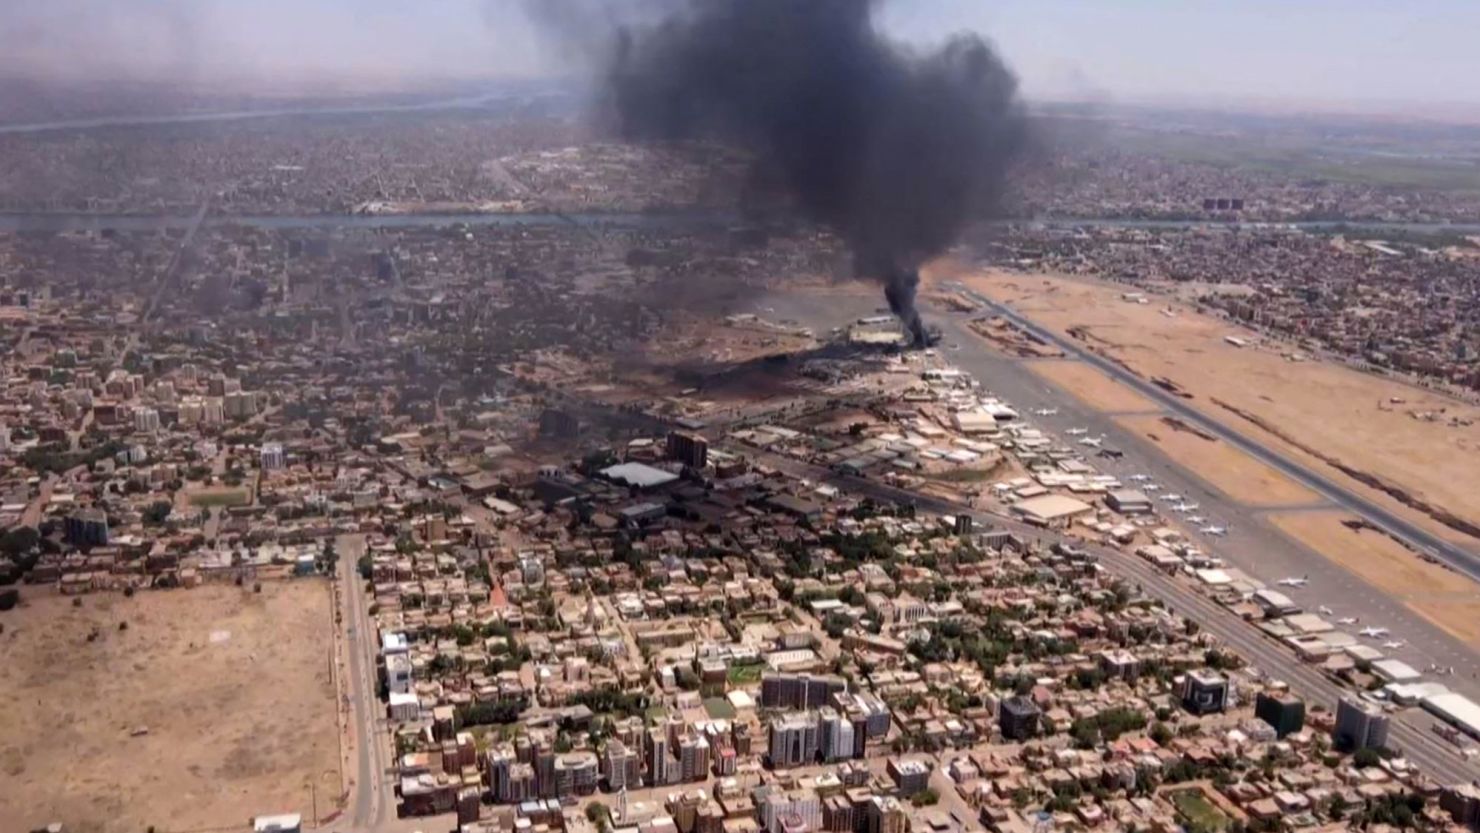 This image grab taken from AFPTV video footage on April 20, 2023, shows an aerial view of black smoke rising above the Khartoum International Airport amid ongoing battles between the forces of two rival generals. - Hundreds of people have been killed since the fighting erupted on April 15 between forces loyal to Sudan's army chief Abdel Fattah al-Burhan and his deputy, Mohamed Hamdan Daglo, who commands the paramilitary Rapid Support Forces (RSF). (Photo by AFP) (Photo by -/AFP via Getty Images)